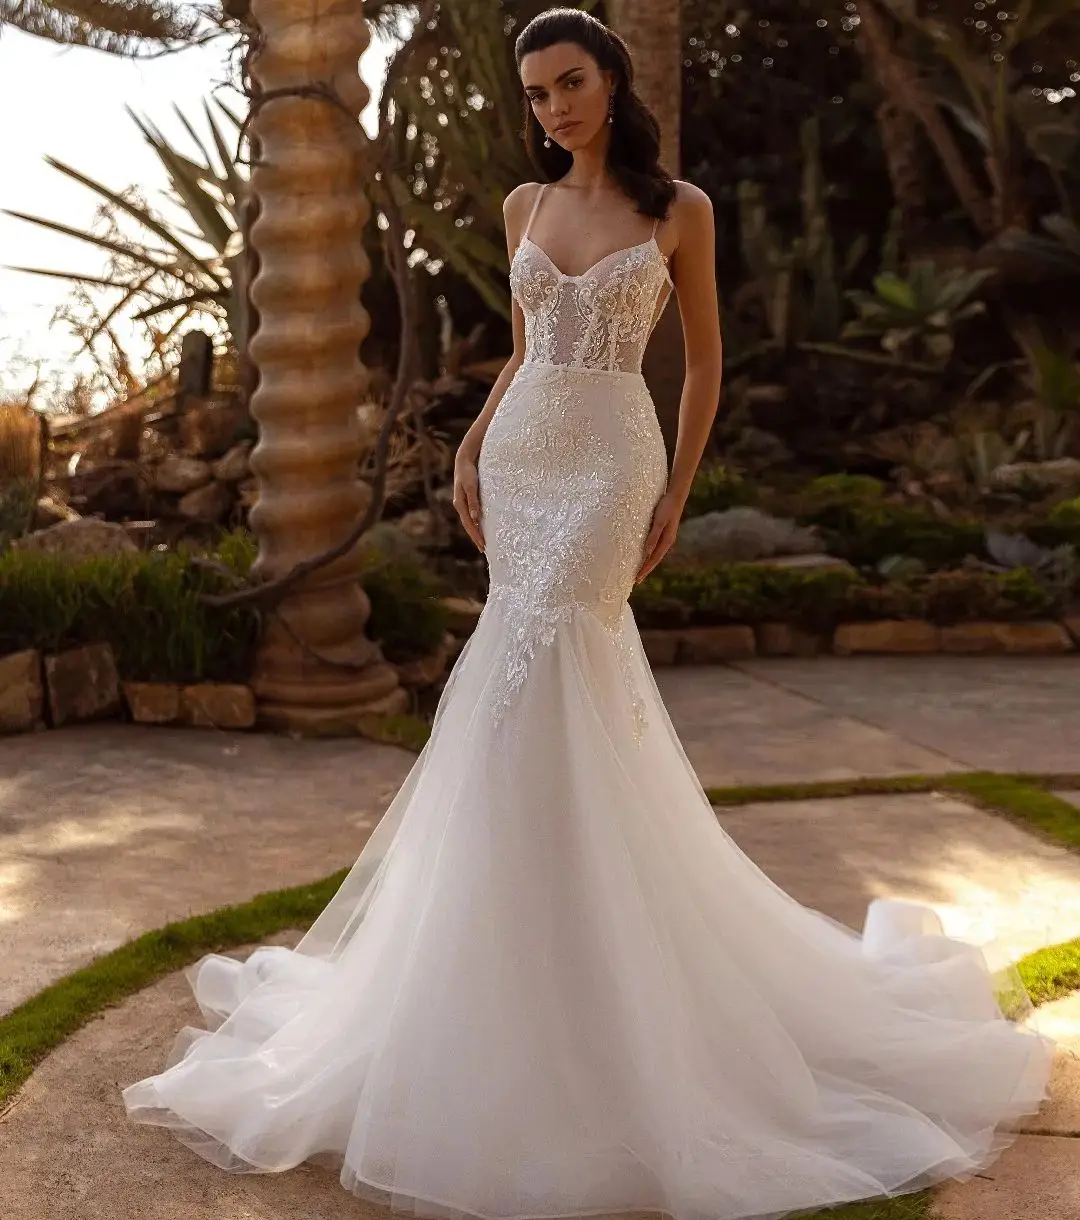 

Romantic Ivory Mermaid Wedding Dresses Lace Appliques Glitter Sequins Bridal Gowns Sexy Sleeveless Long Train Robes de Mariee